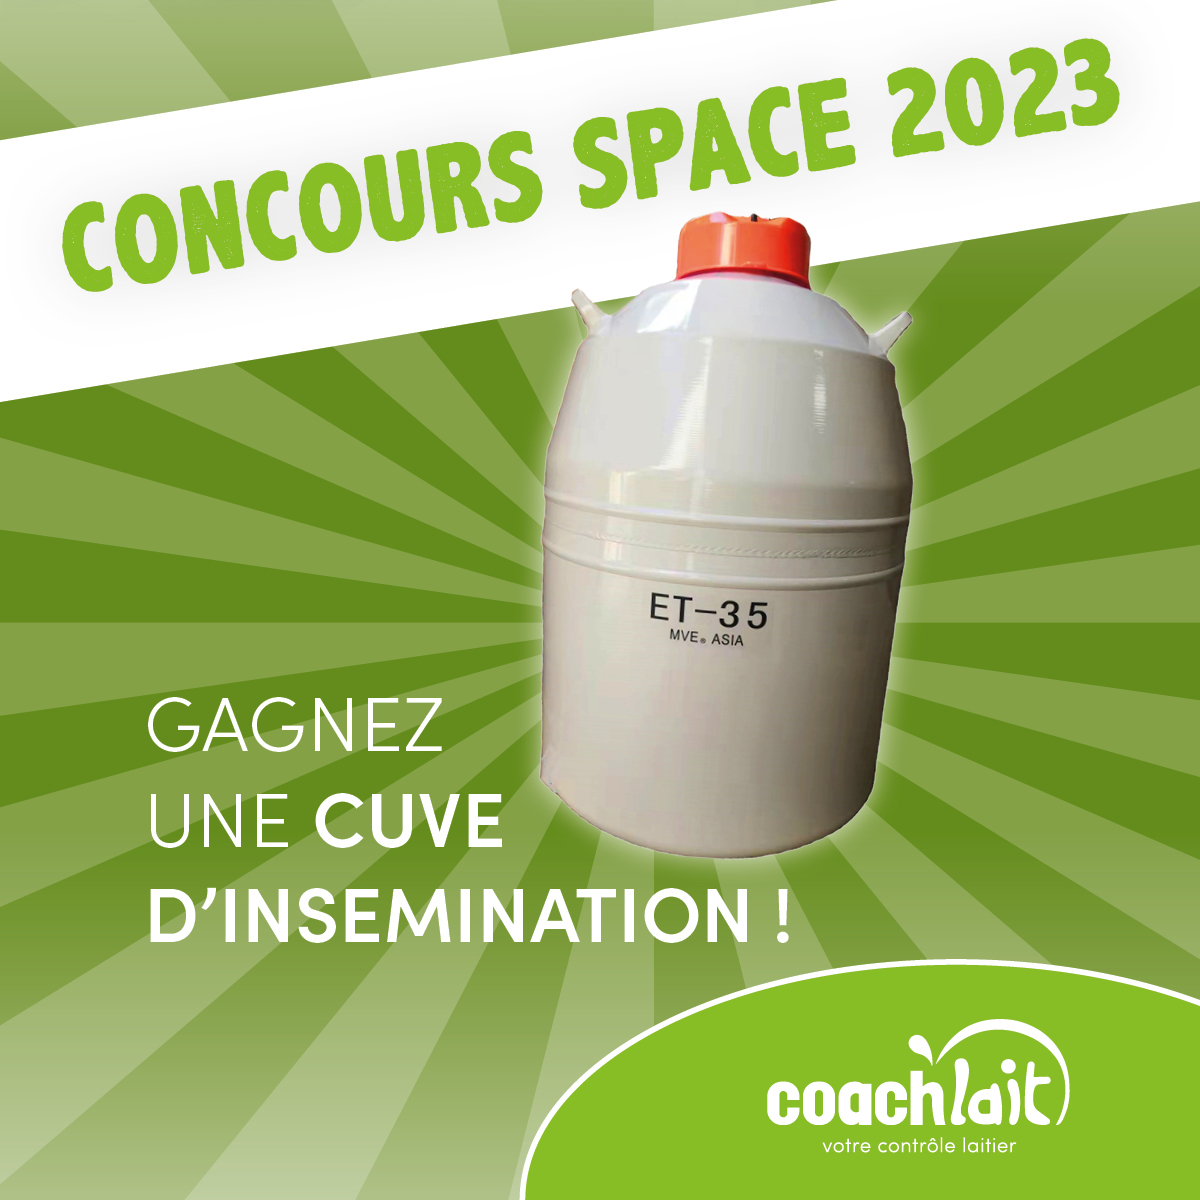 Concours SPACE 2023